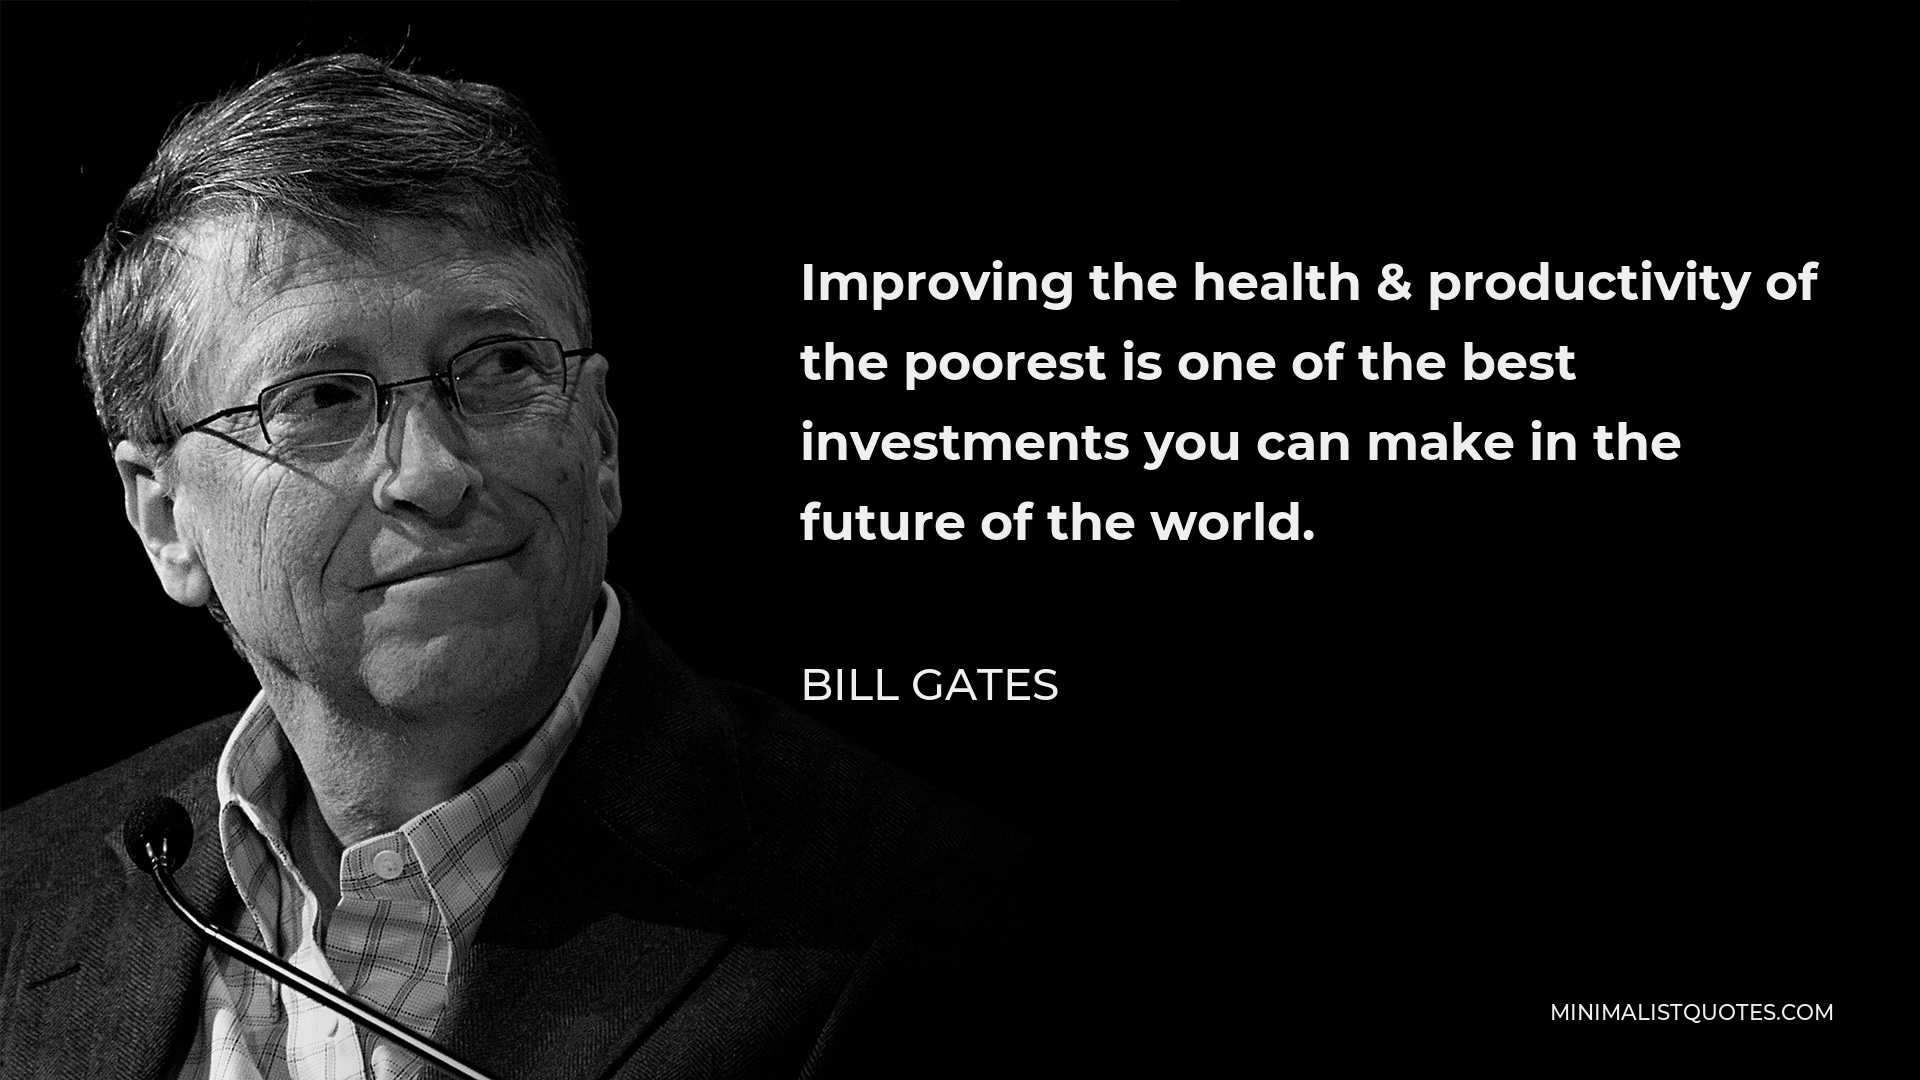 Bill Gates Quote - Improving the health & productivity of the poorest is one of the best investments you can make in the future of the world.